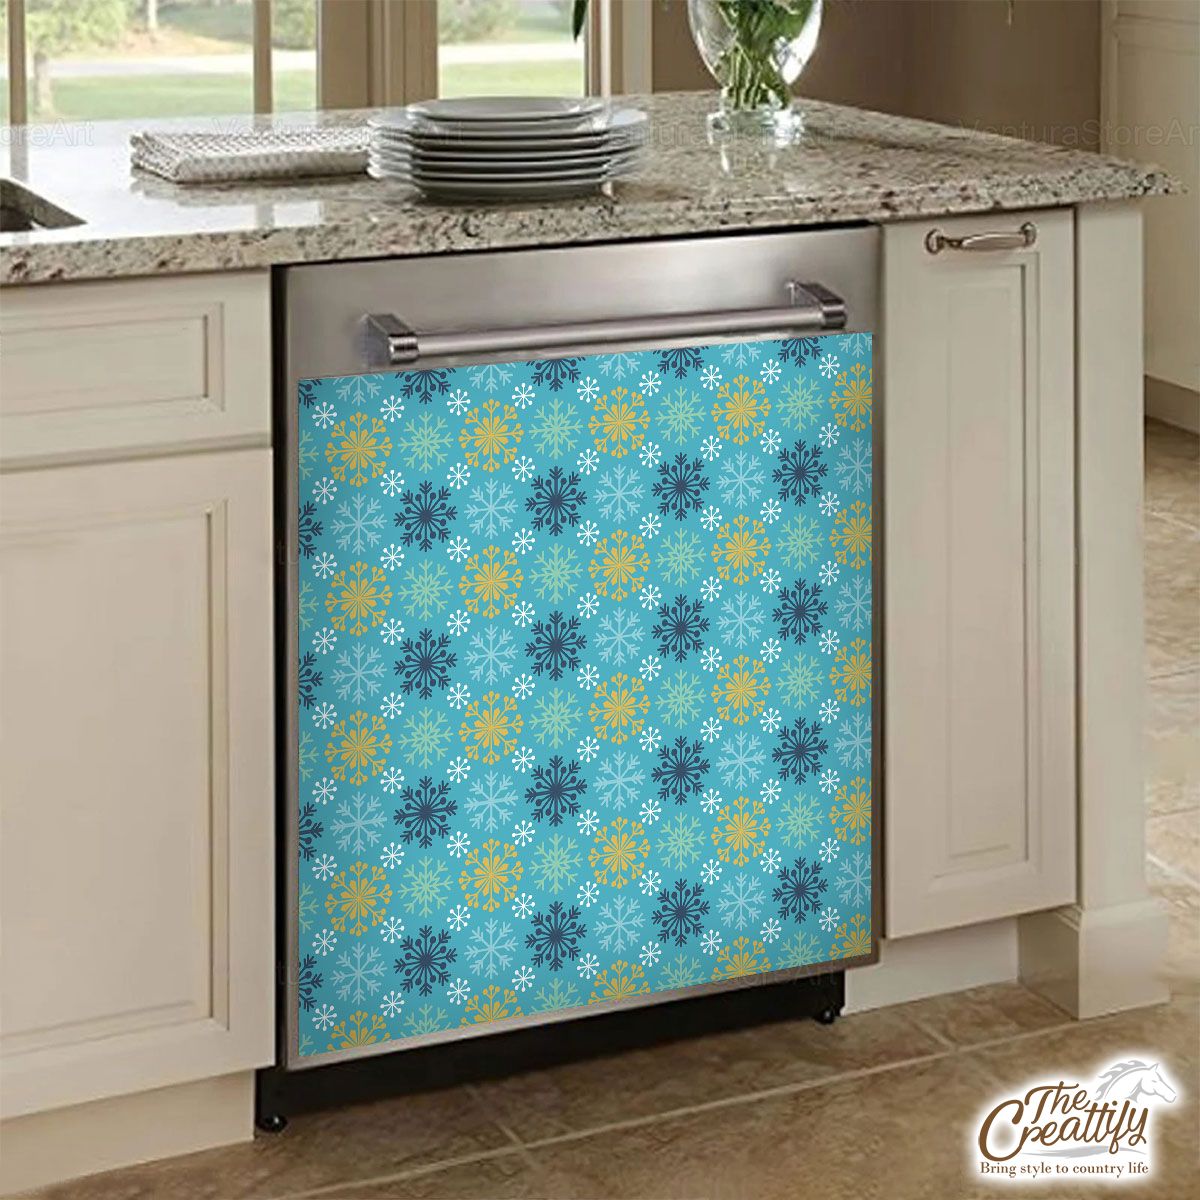 Blue And Yellow Snowflake Pattern Dishwasher Cover